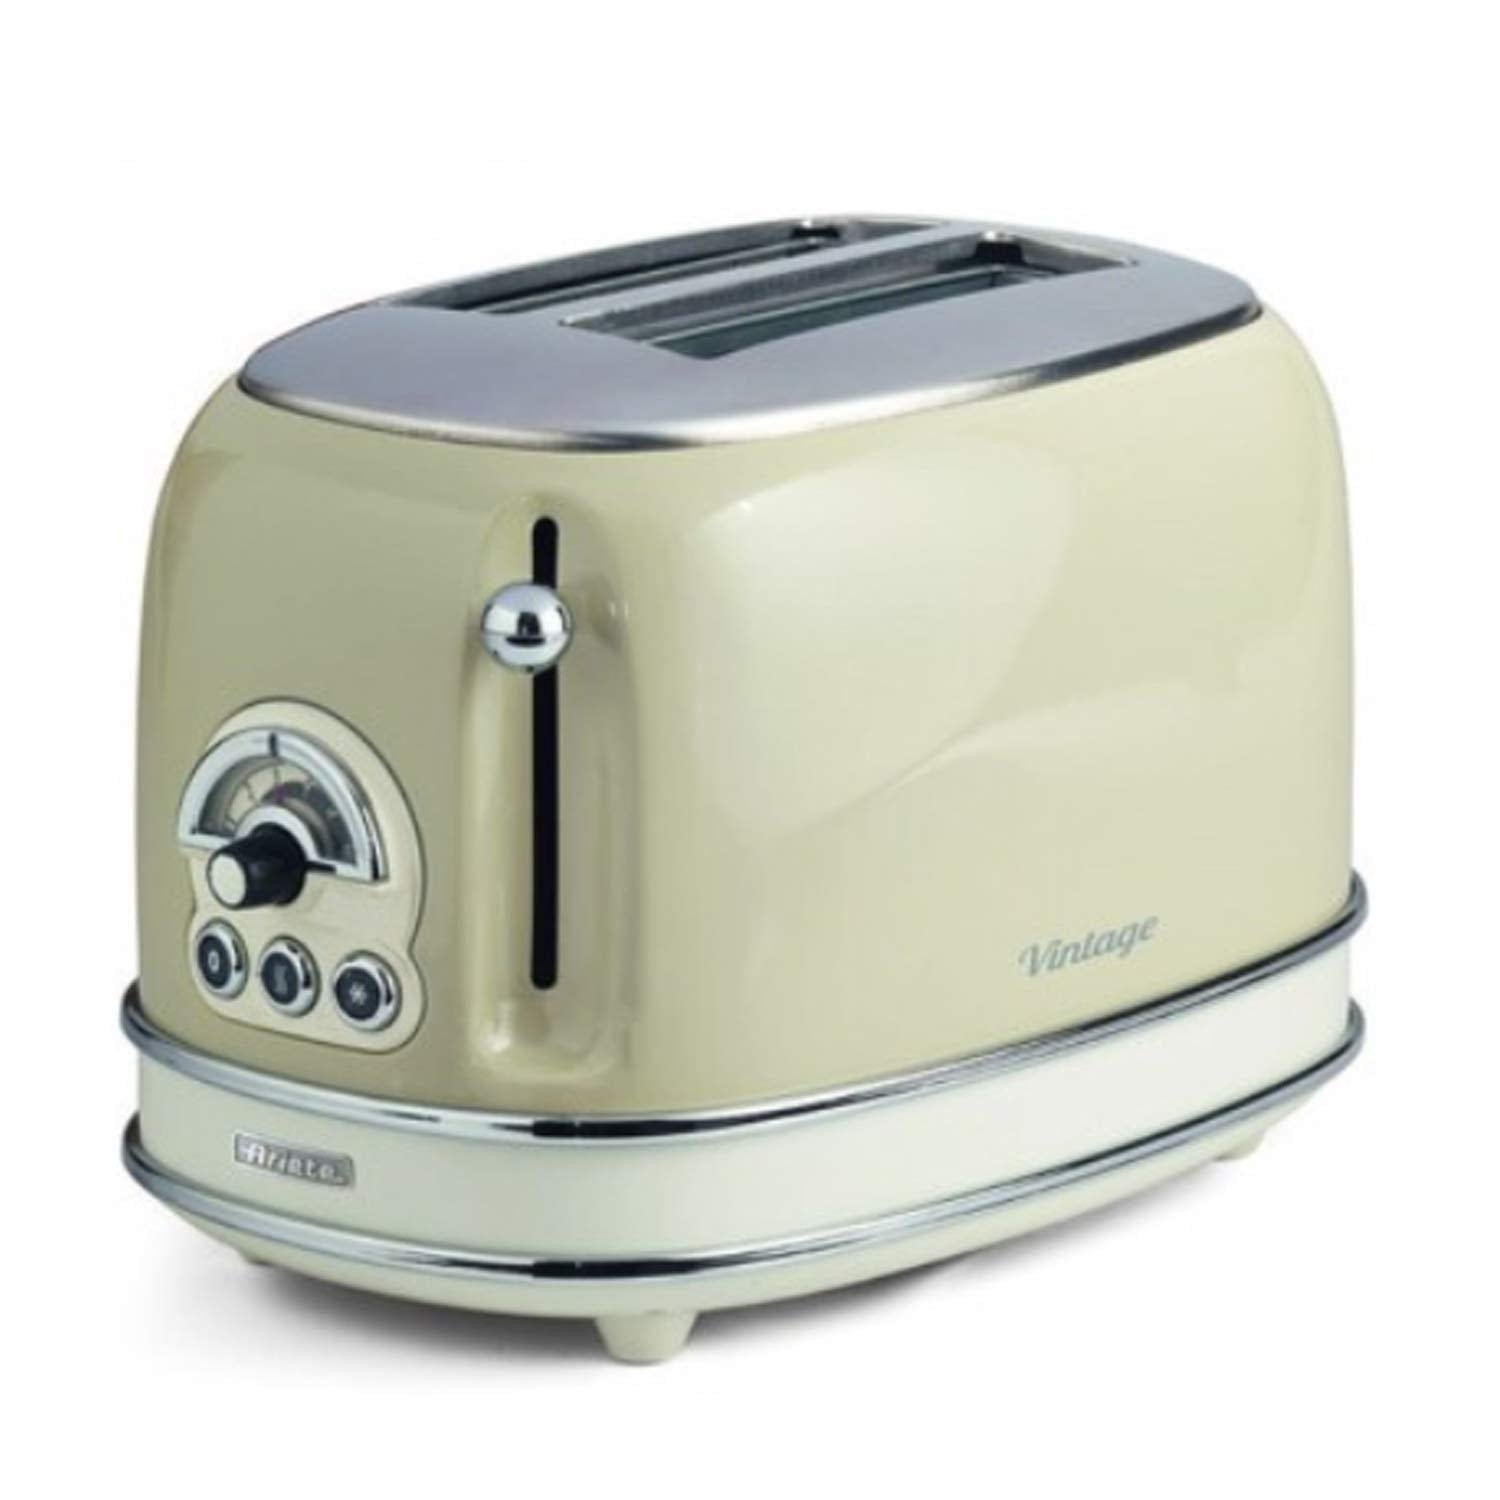 Ariete 155 Design Toaster 2 Slices With Tongs, 6 Toasting Levels, 810 W,  Stainless Steel Body, Removable Crumb Tray, Pastel Beige